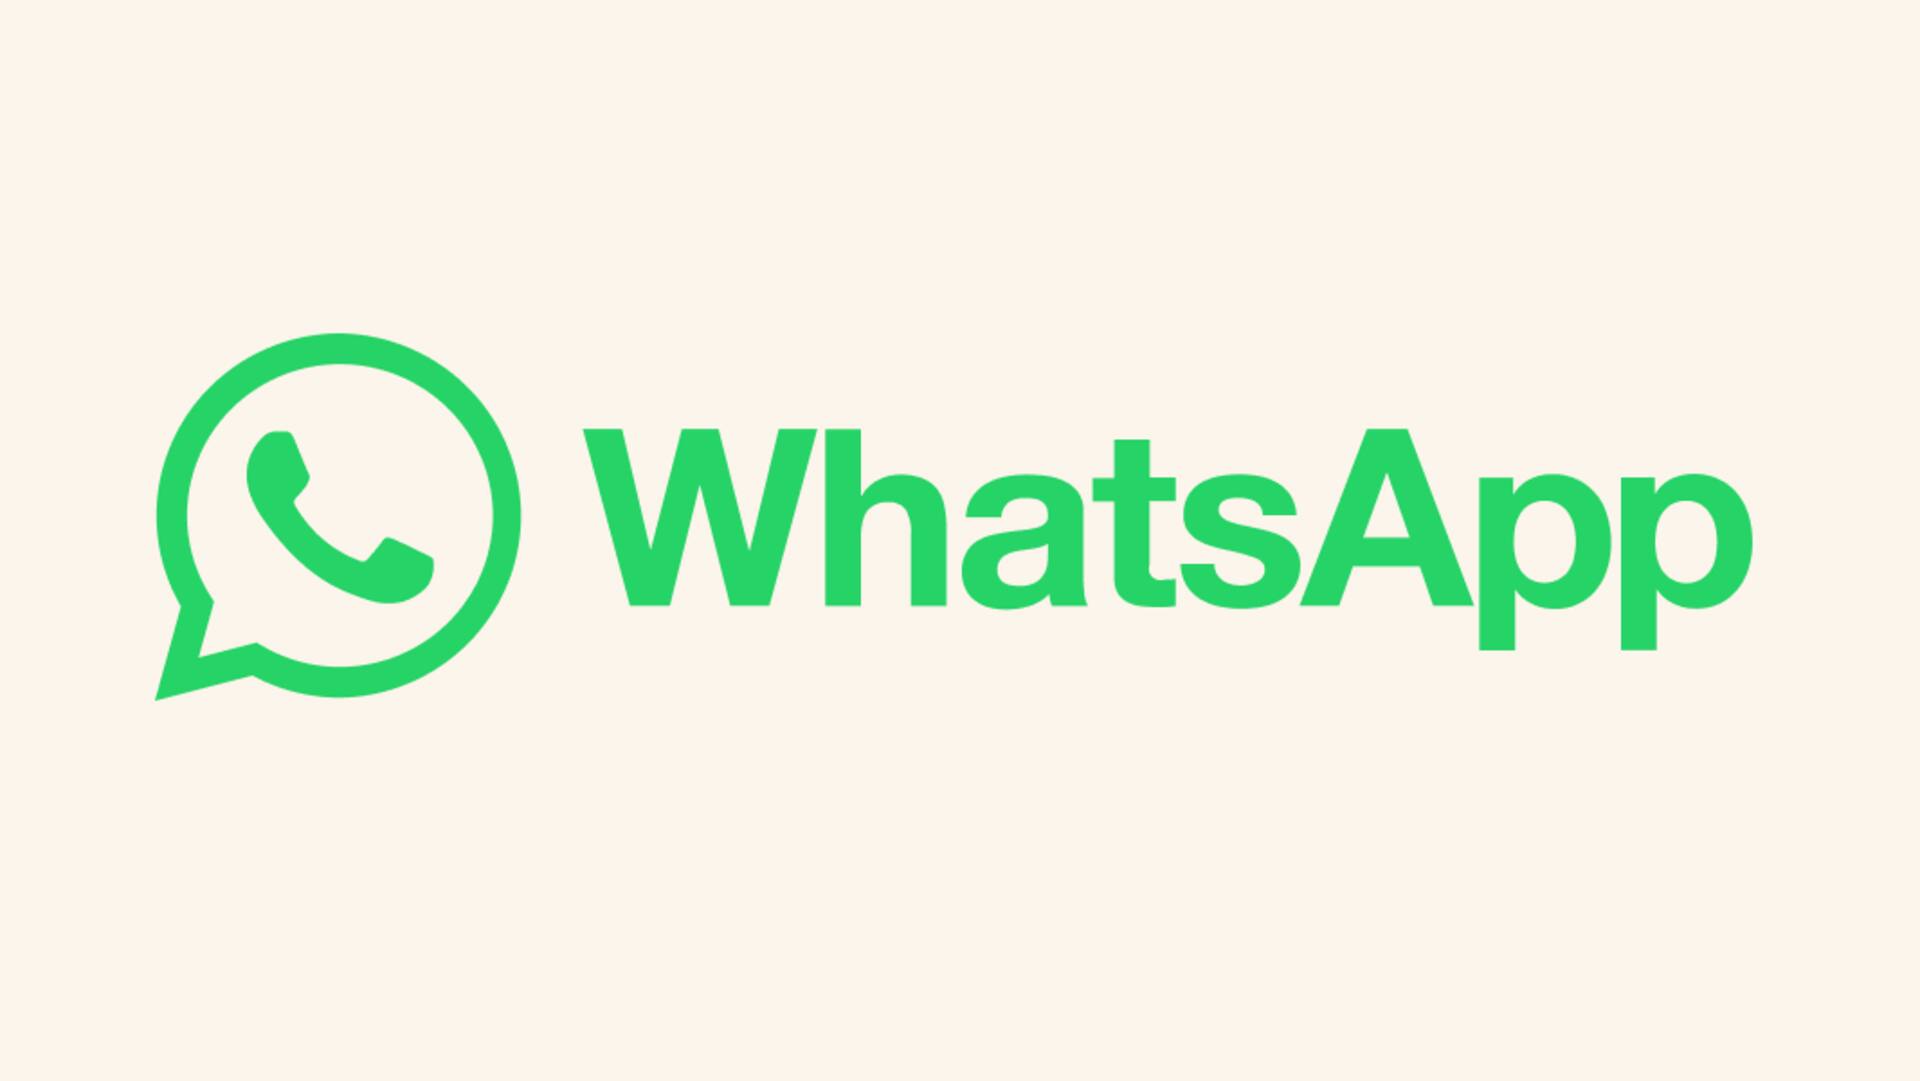 WhatsApp will soon let you report status updates